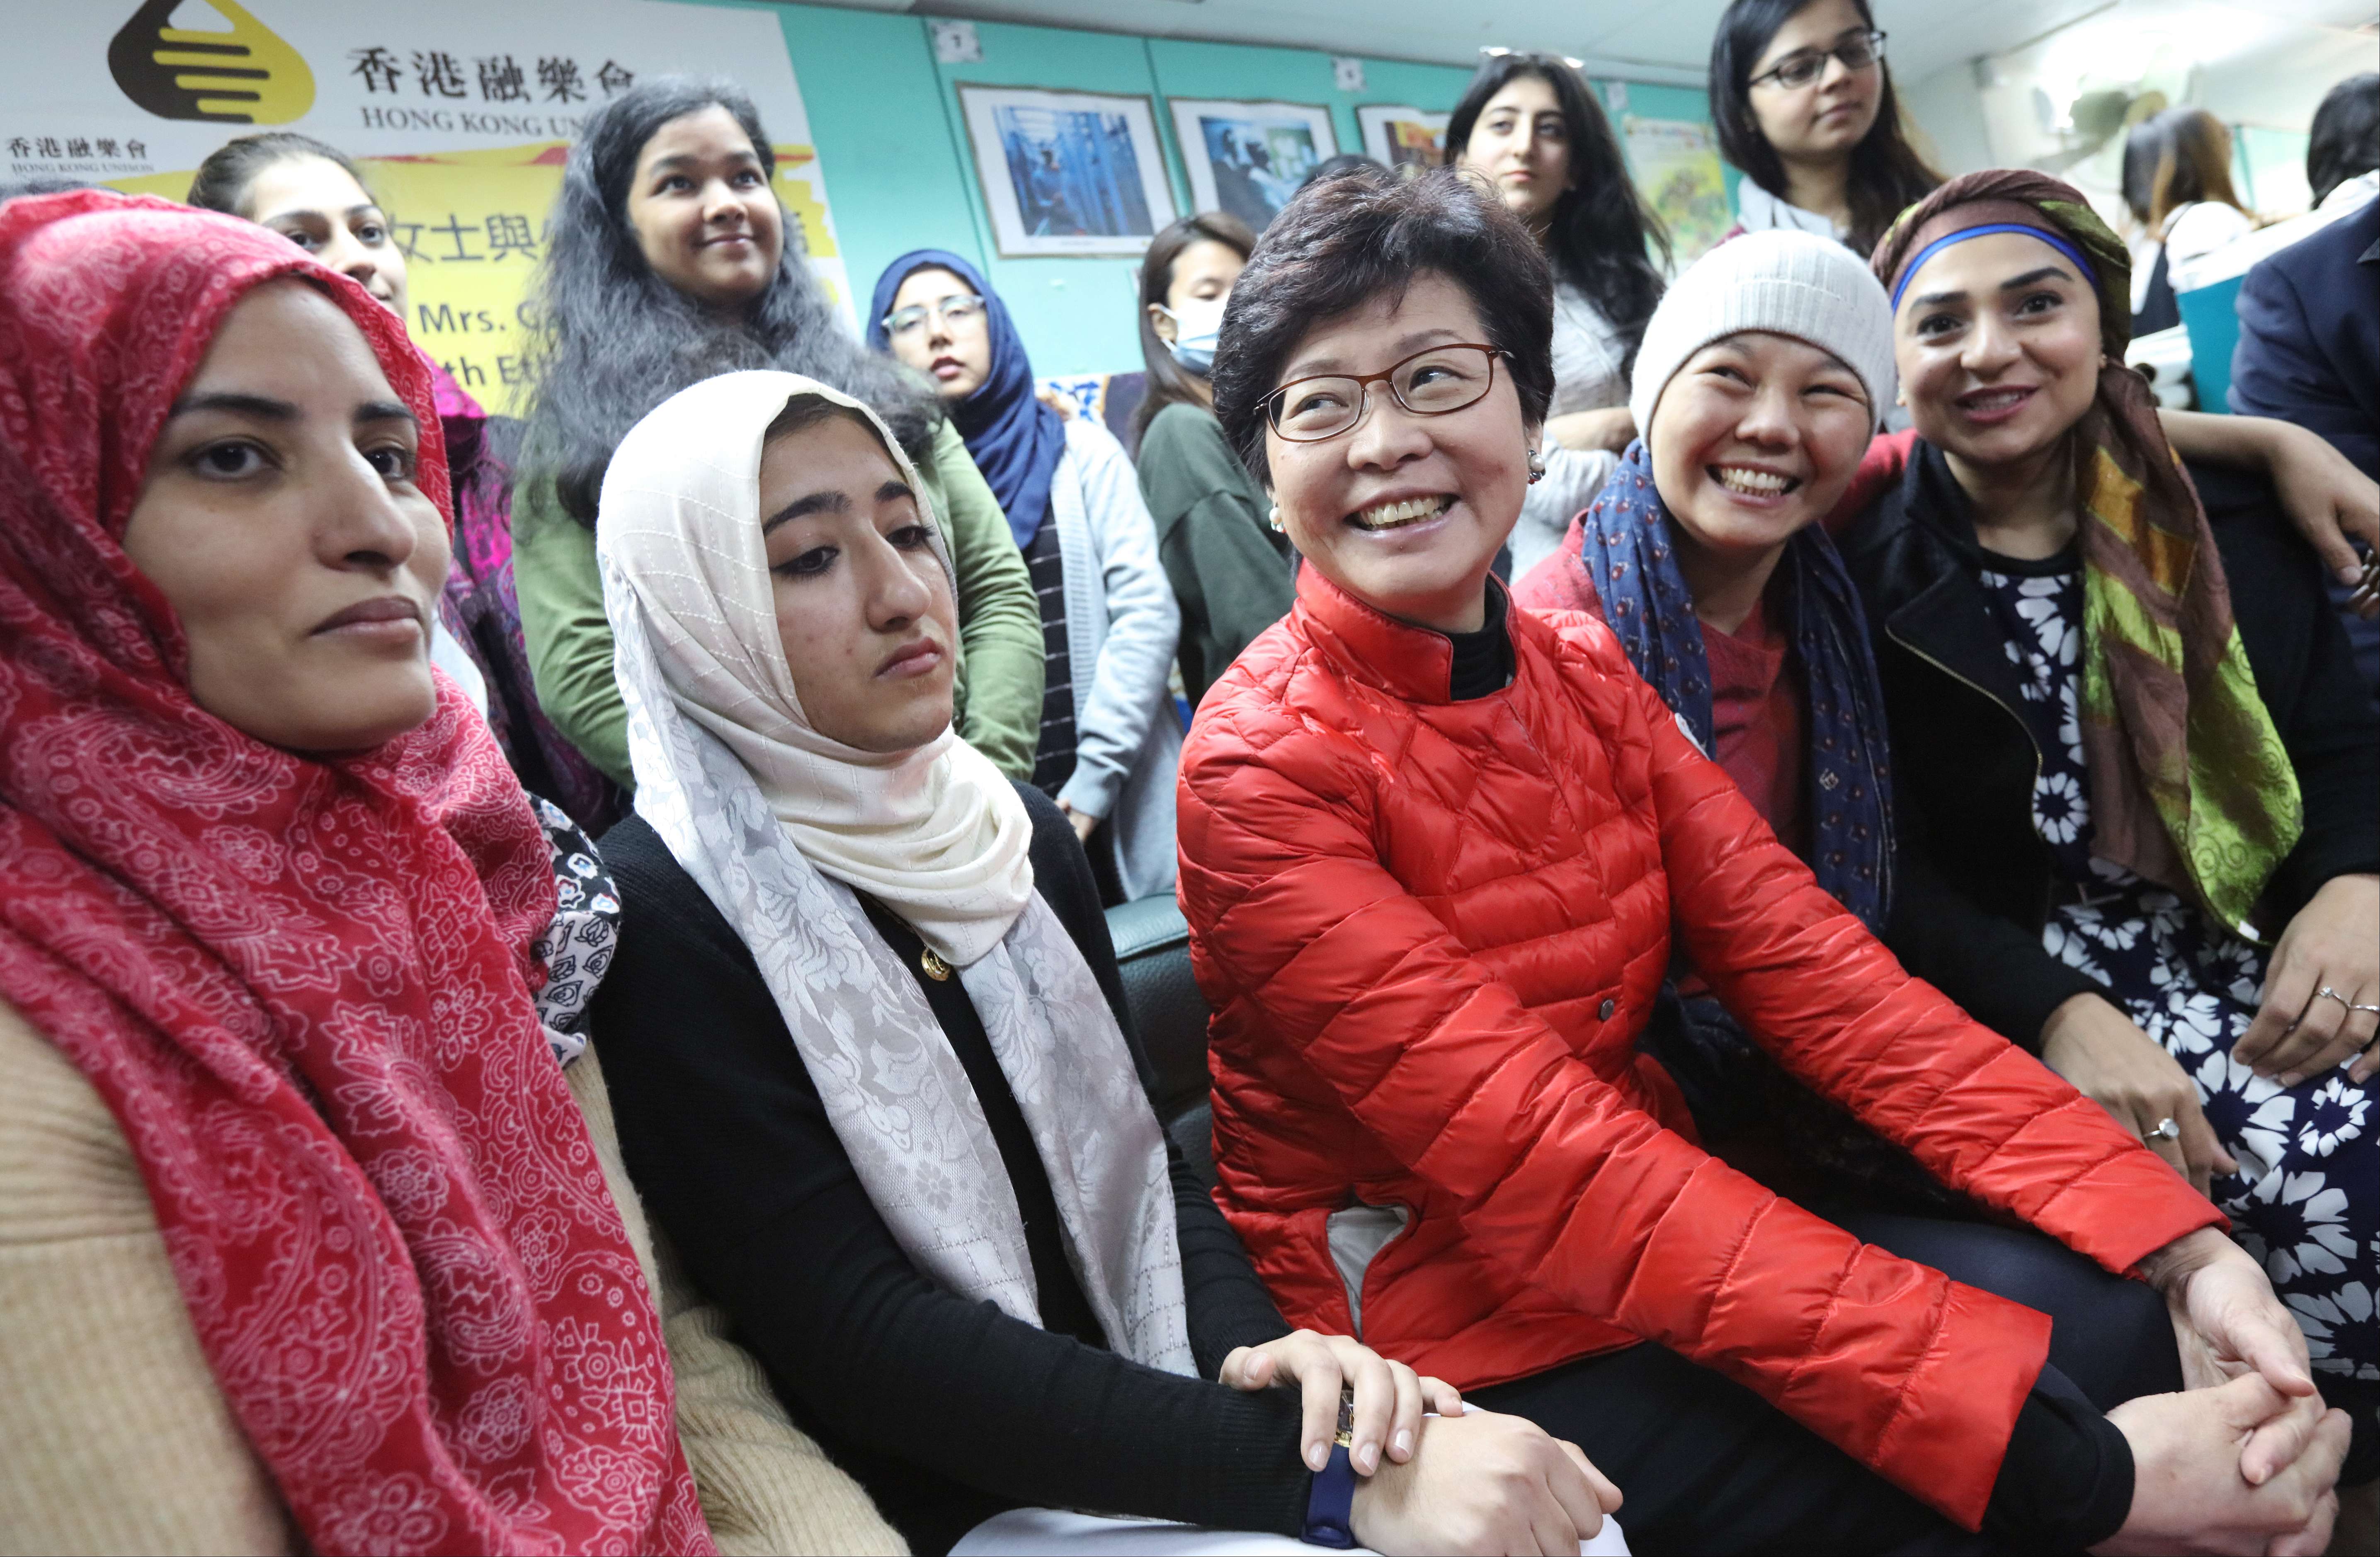 Chief executive candidate Carrie Lam Cheng Yuet-ngor meets members of the non-ethnic-Chinese community to understand their difficulties, at Hong Kong Unison in Tai Kok Tsui on February 18. Photo: Felix Wong